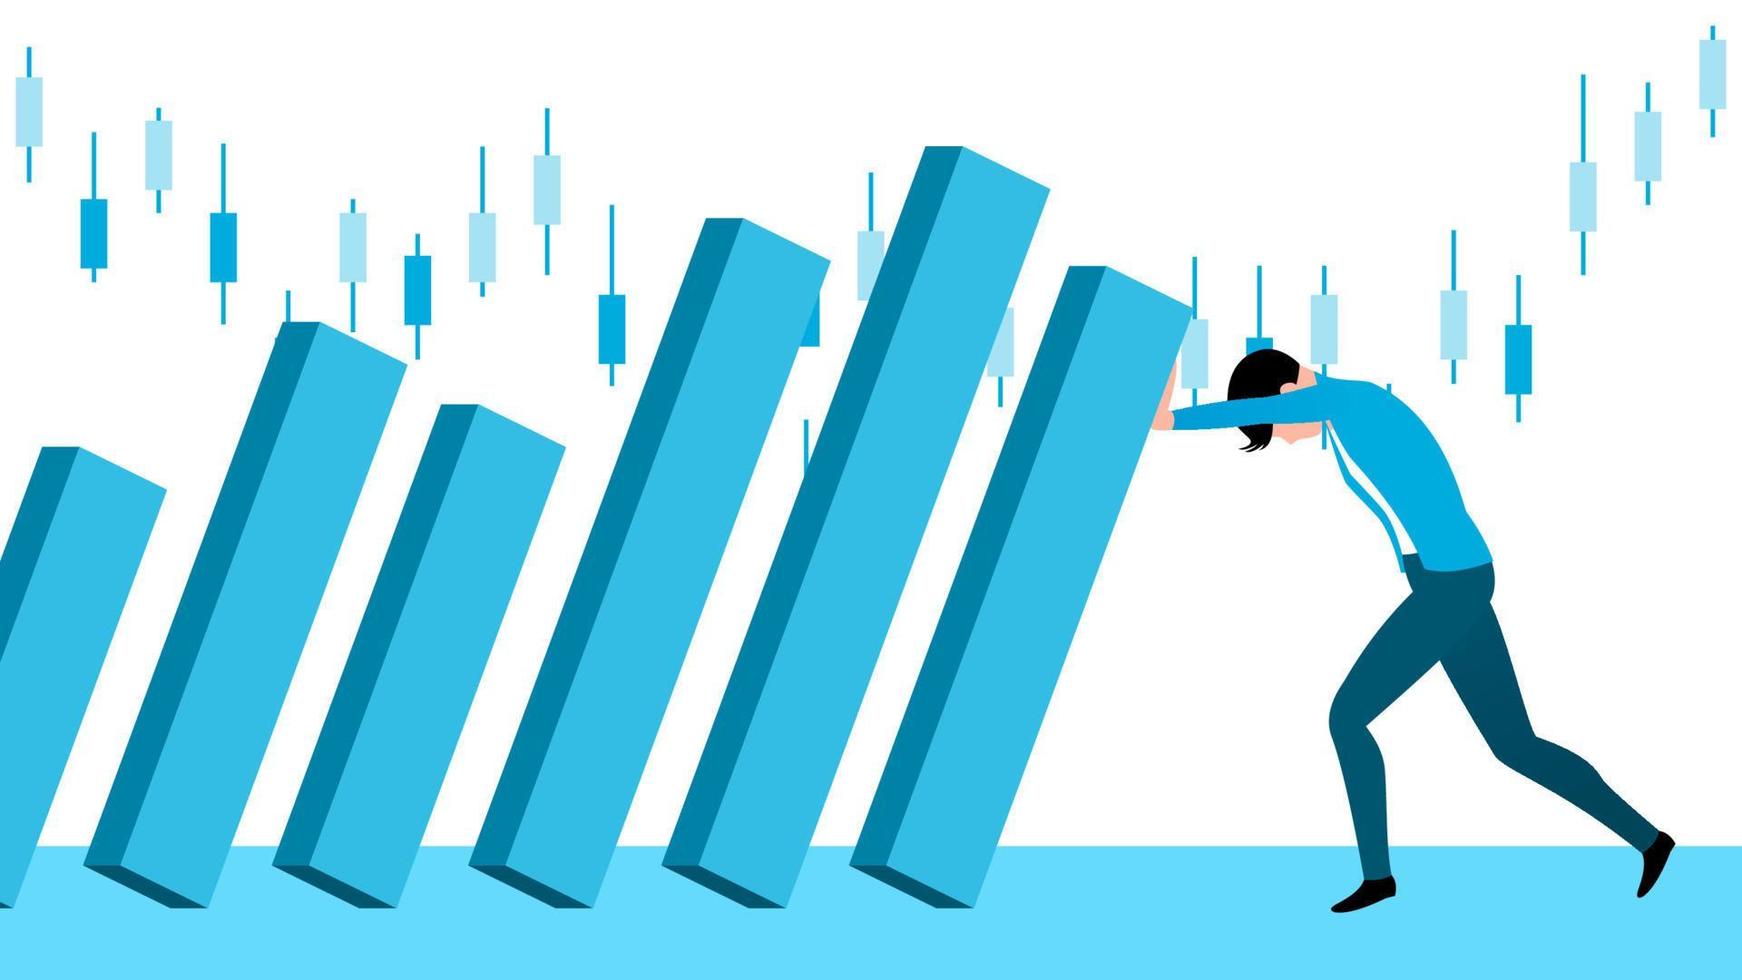 Man trying to push falling graph bar due to market crisis, global recession vector illustration